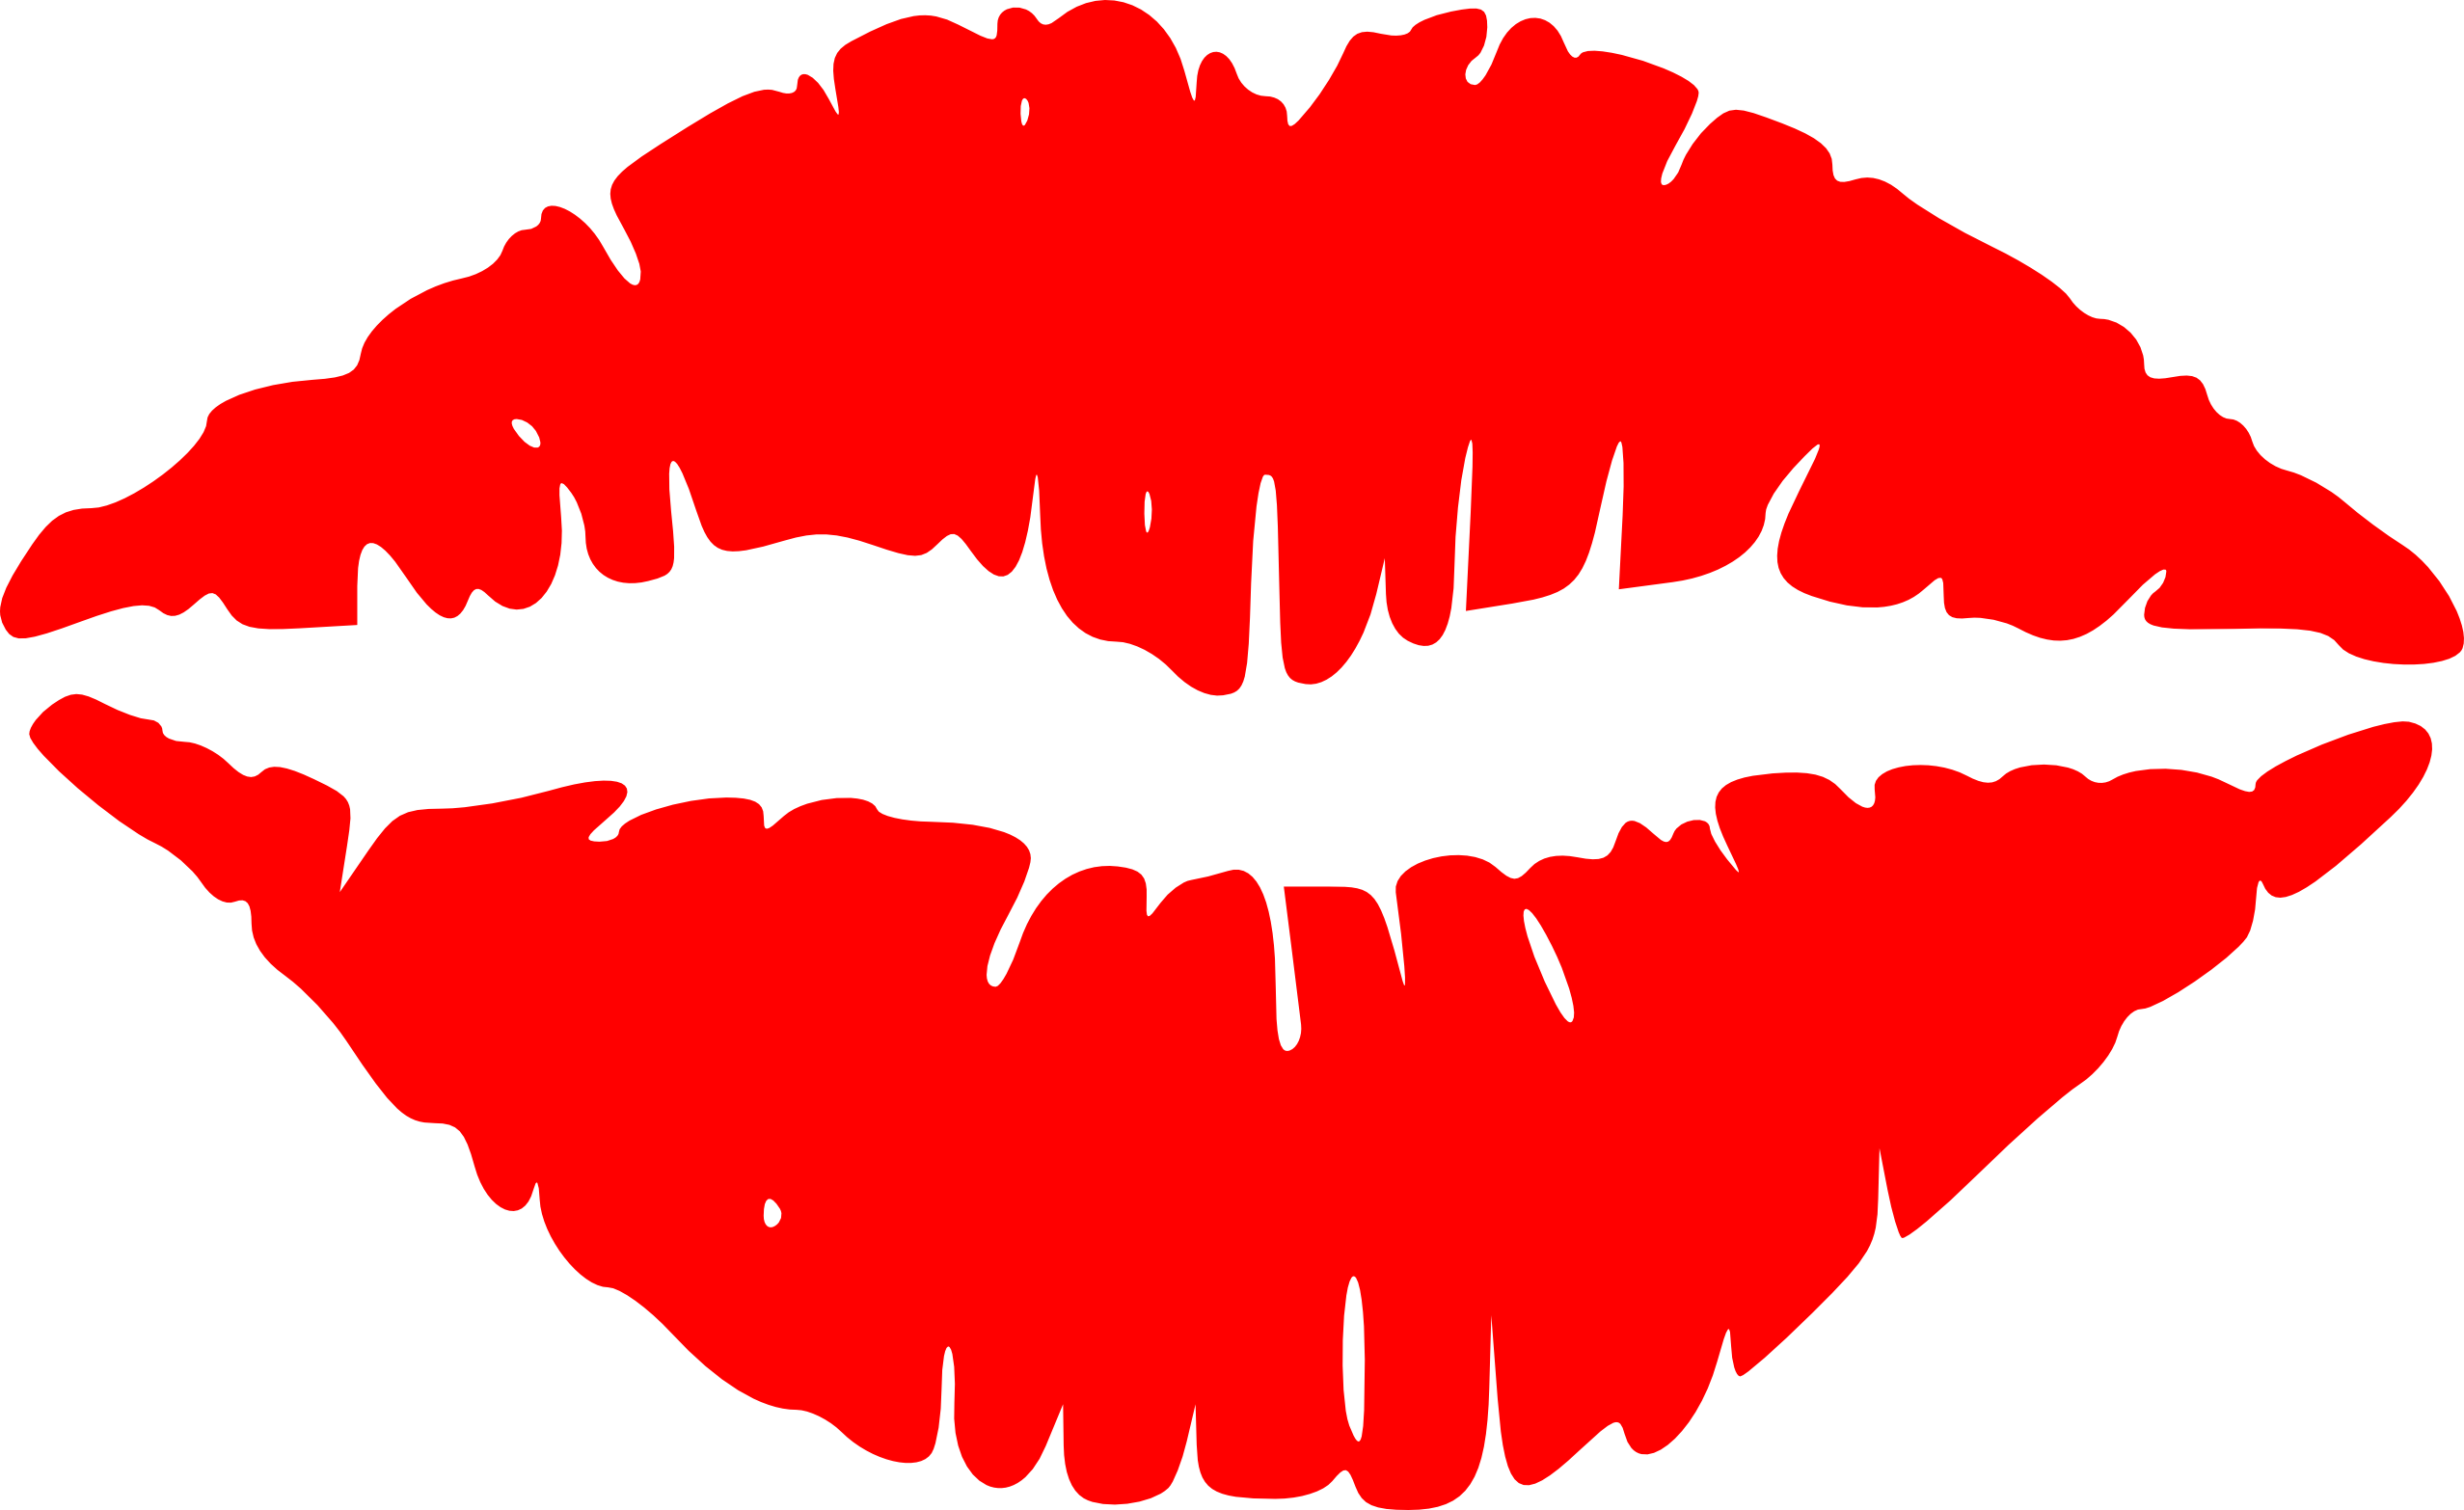 Lips Coloring Pages - ClipArt Best